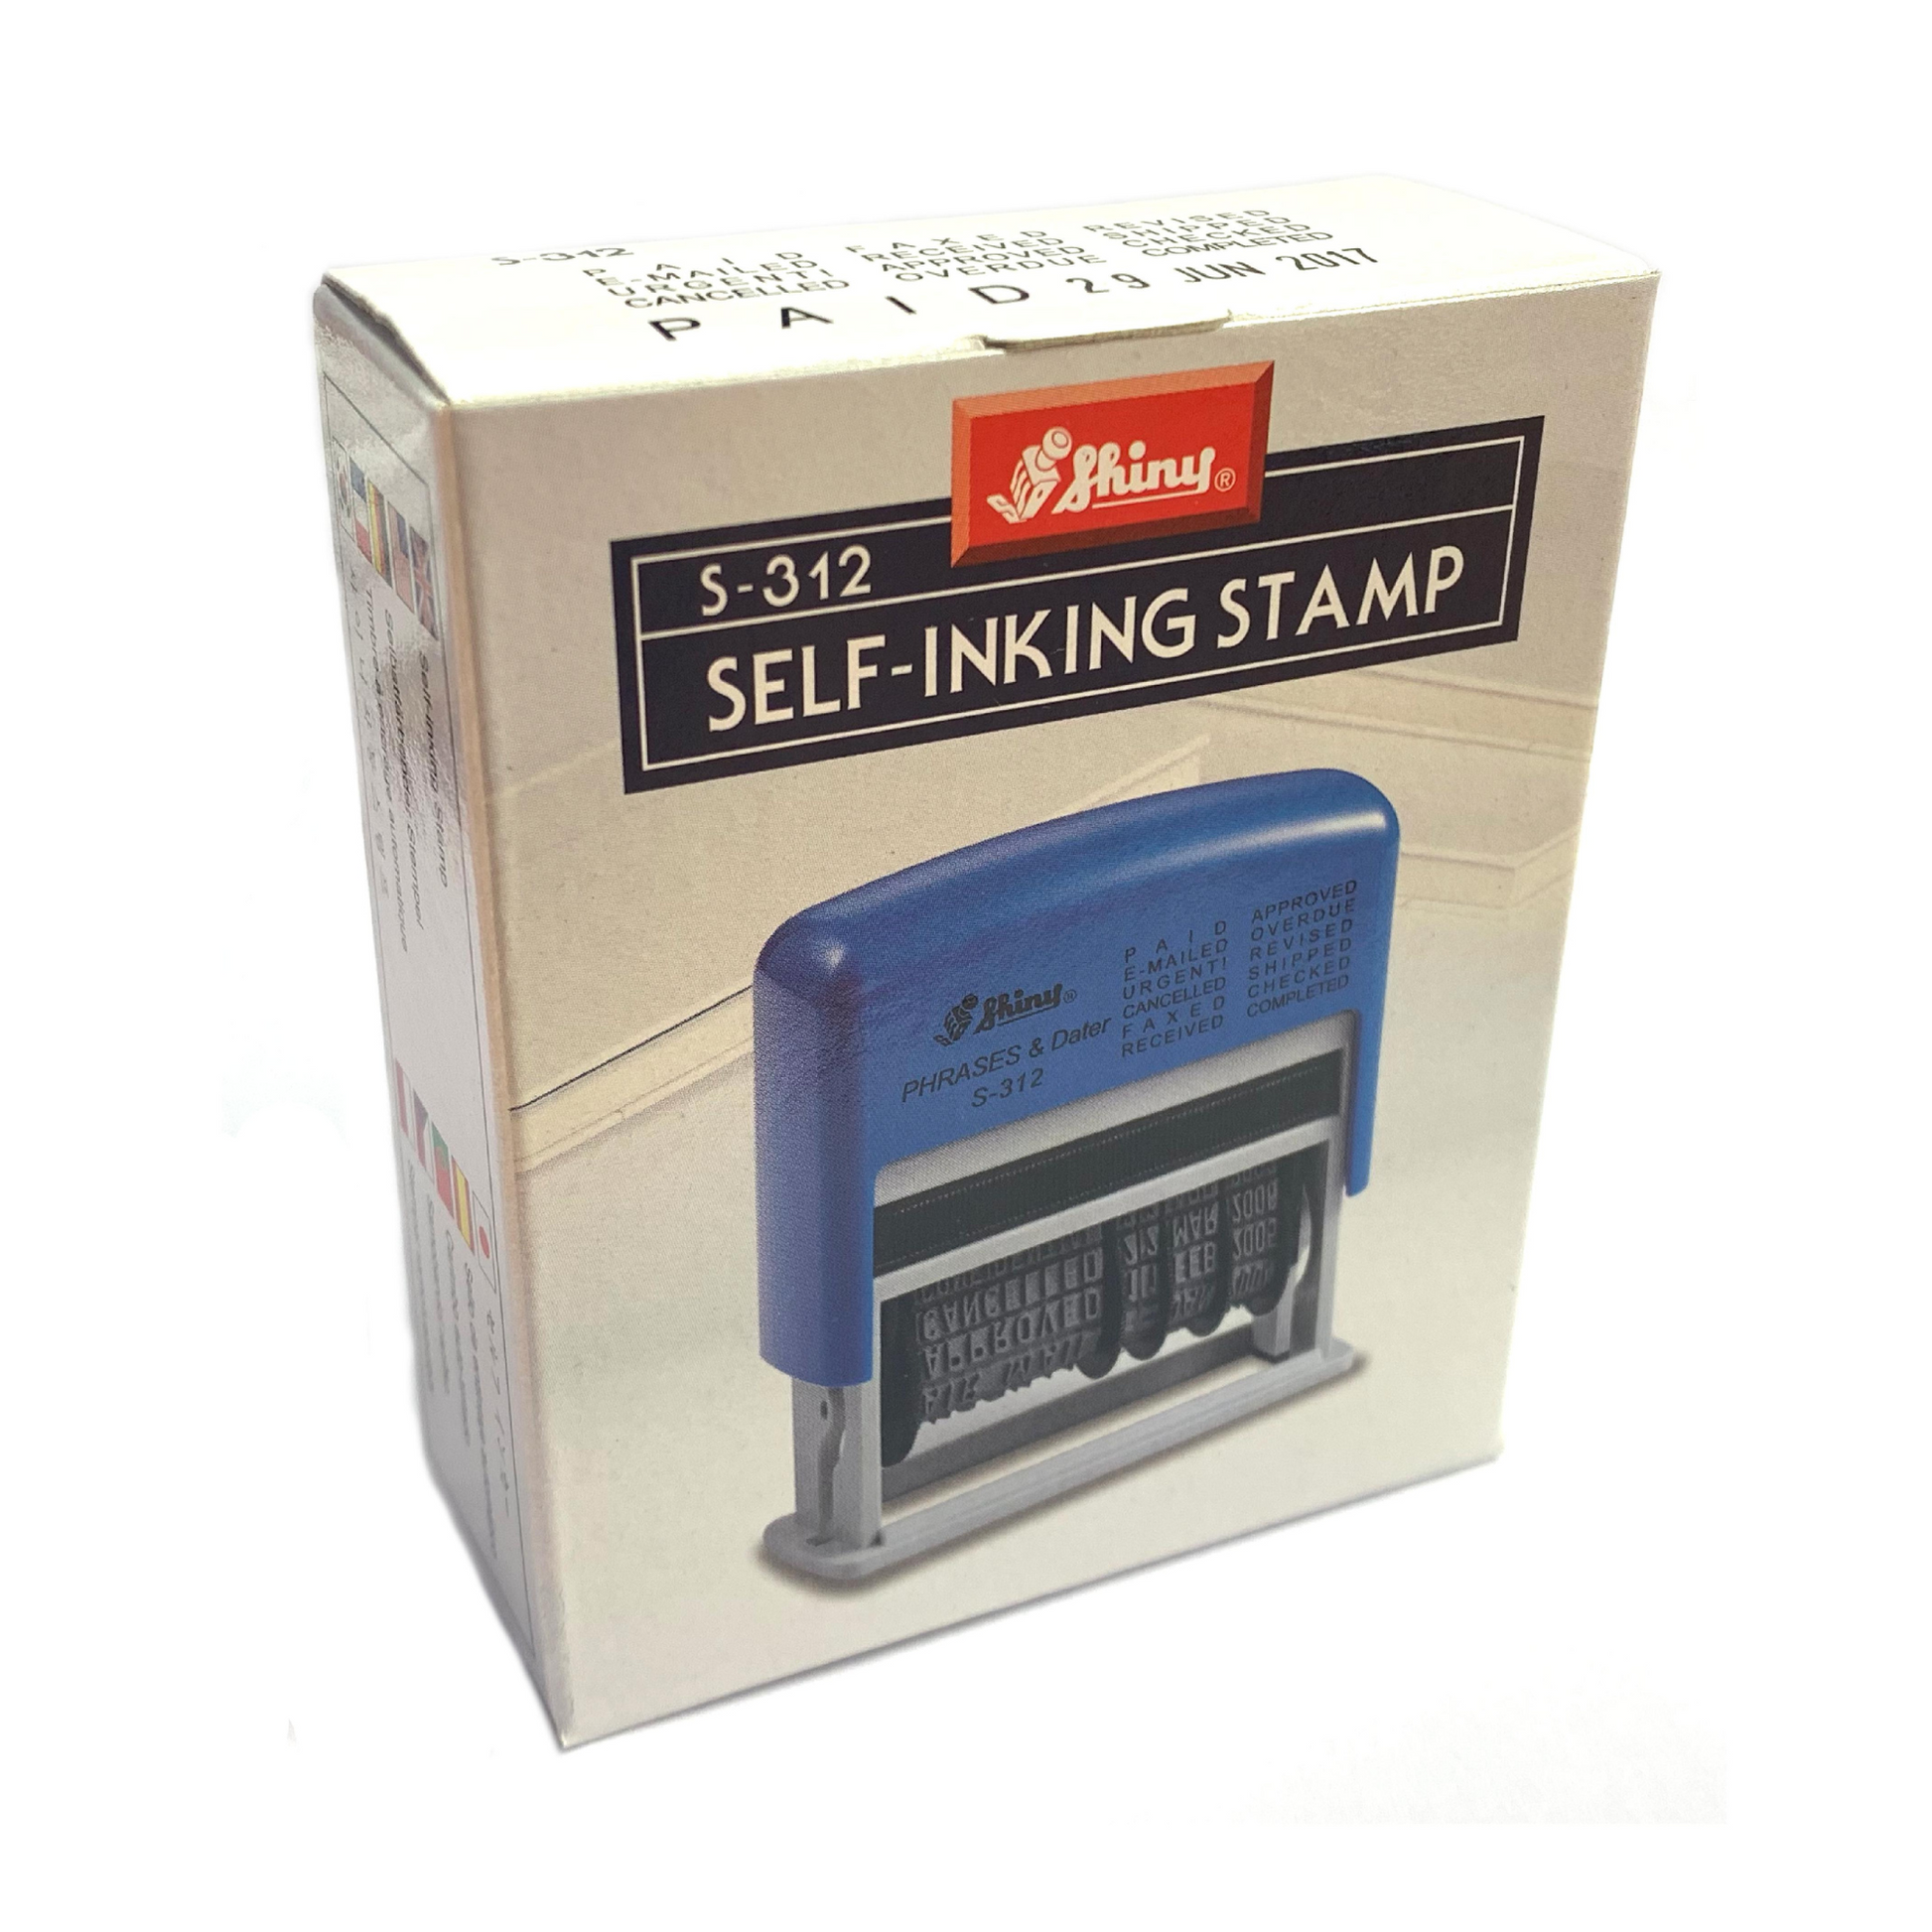 The packaging for a Shiny S-312 Self-Inking Stamp. The box is white with red and black text, and features an image of a blue and gray stamp on the front. The stamp's packaging lists several phrases like 'PAID', 'APPROVED', and 'E-MAILED' along the side, indicating the stamp's capabilities for office use.